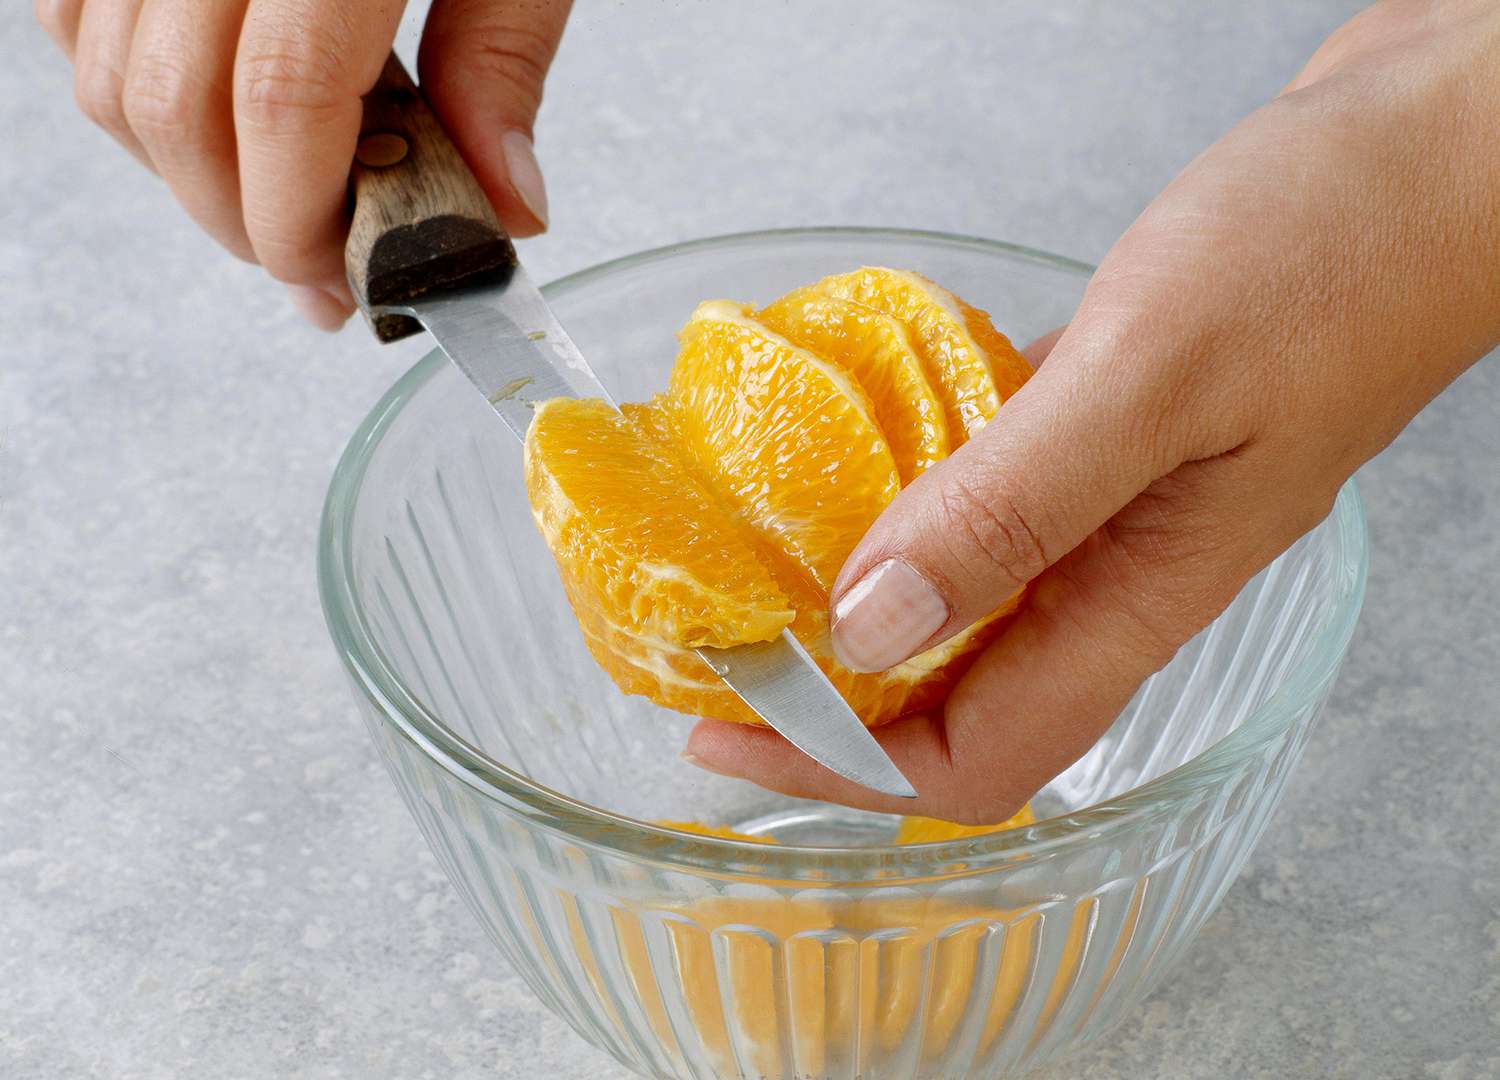 Cutting sections of orange